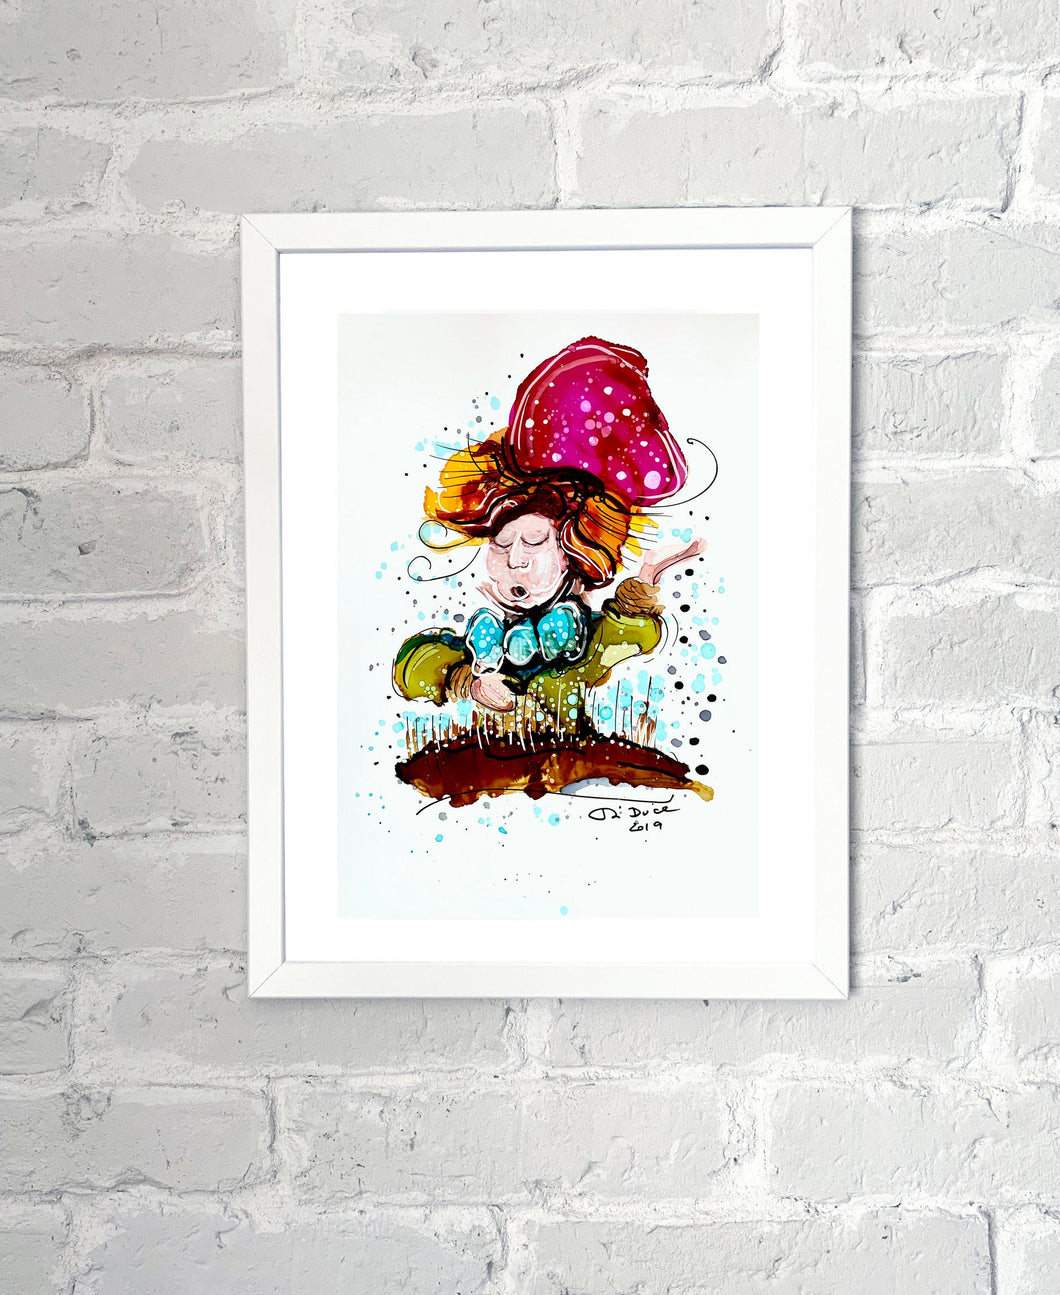 The Mad Hatter - Alcohol Ink Painting on Yupo Paper